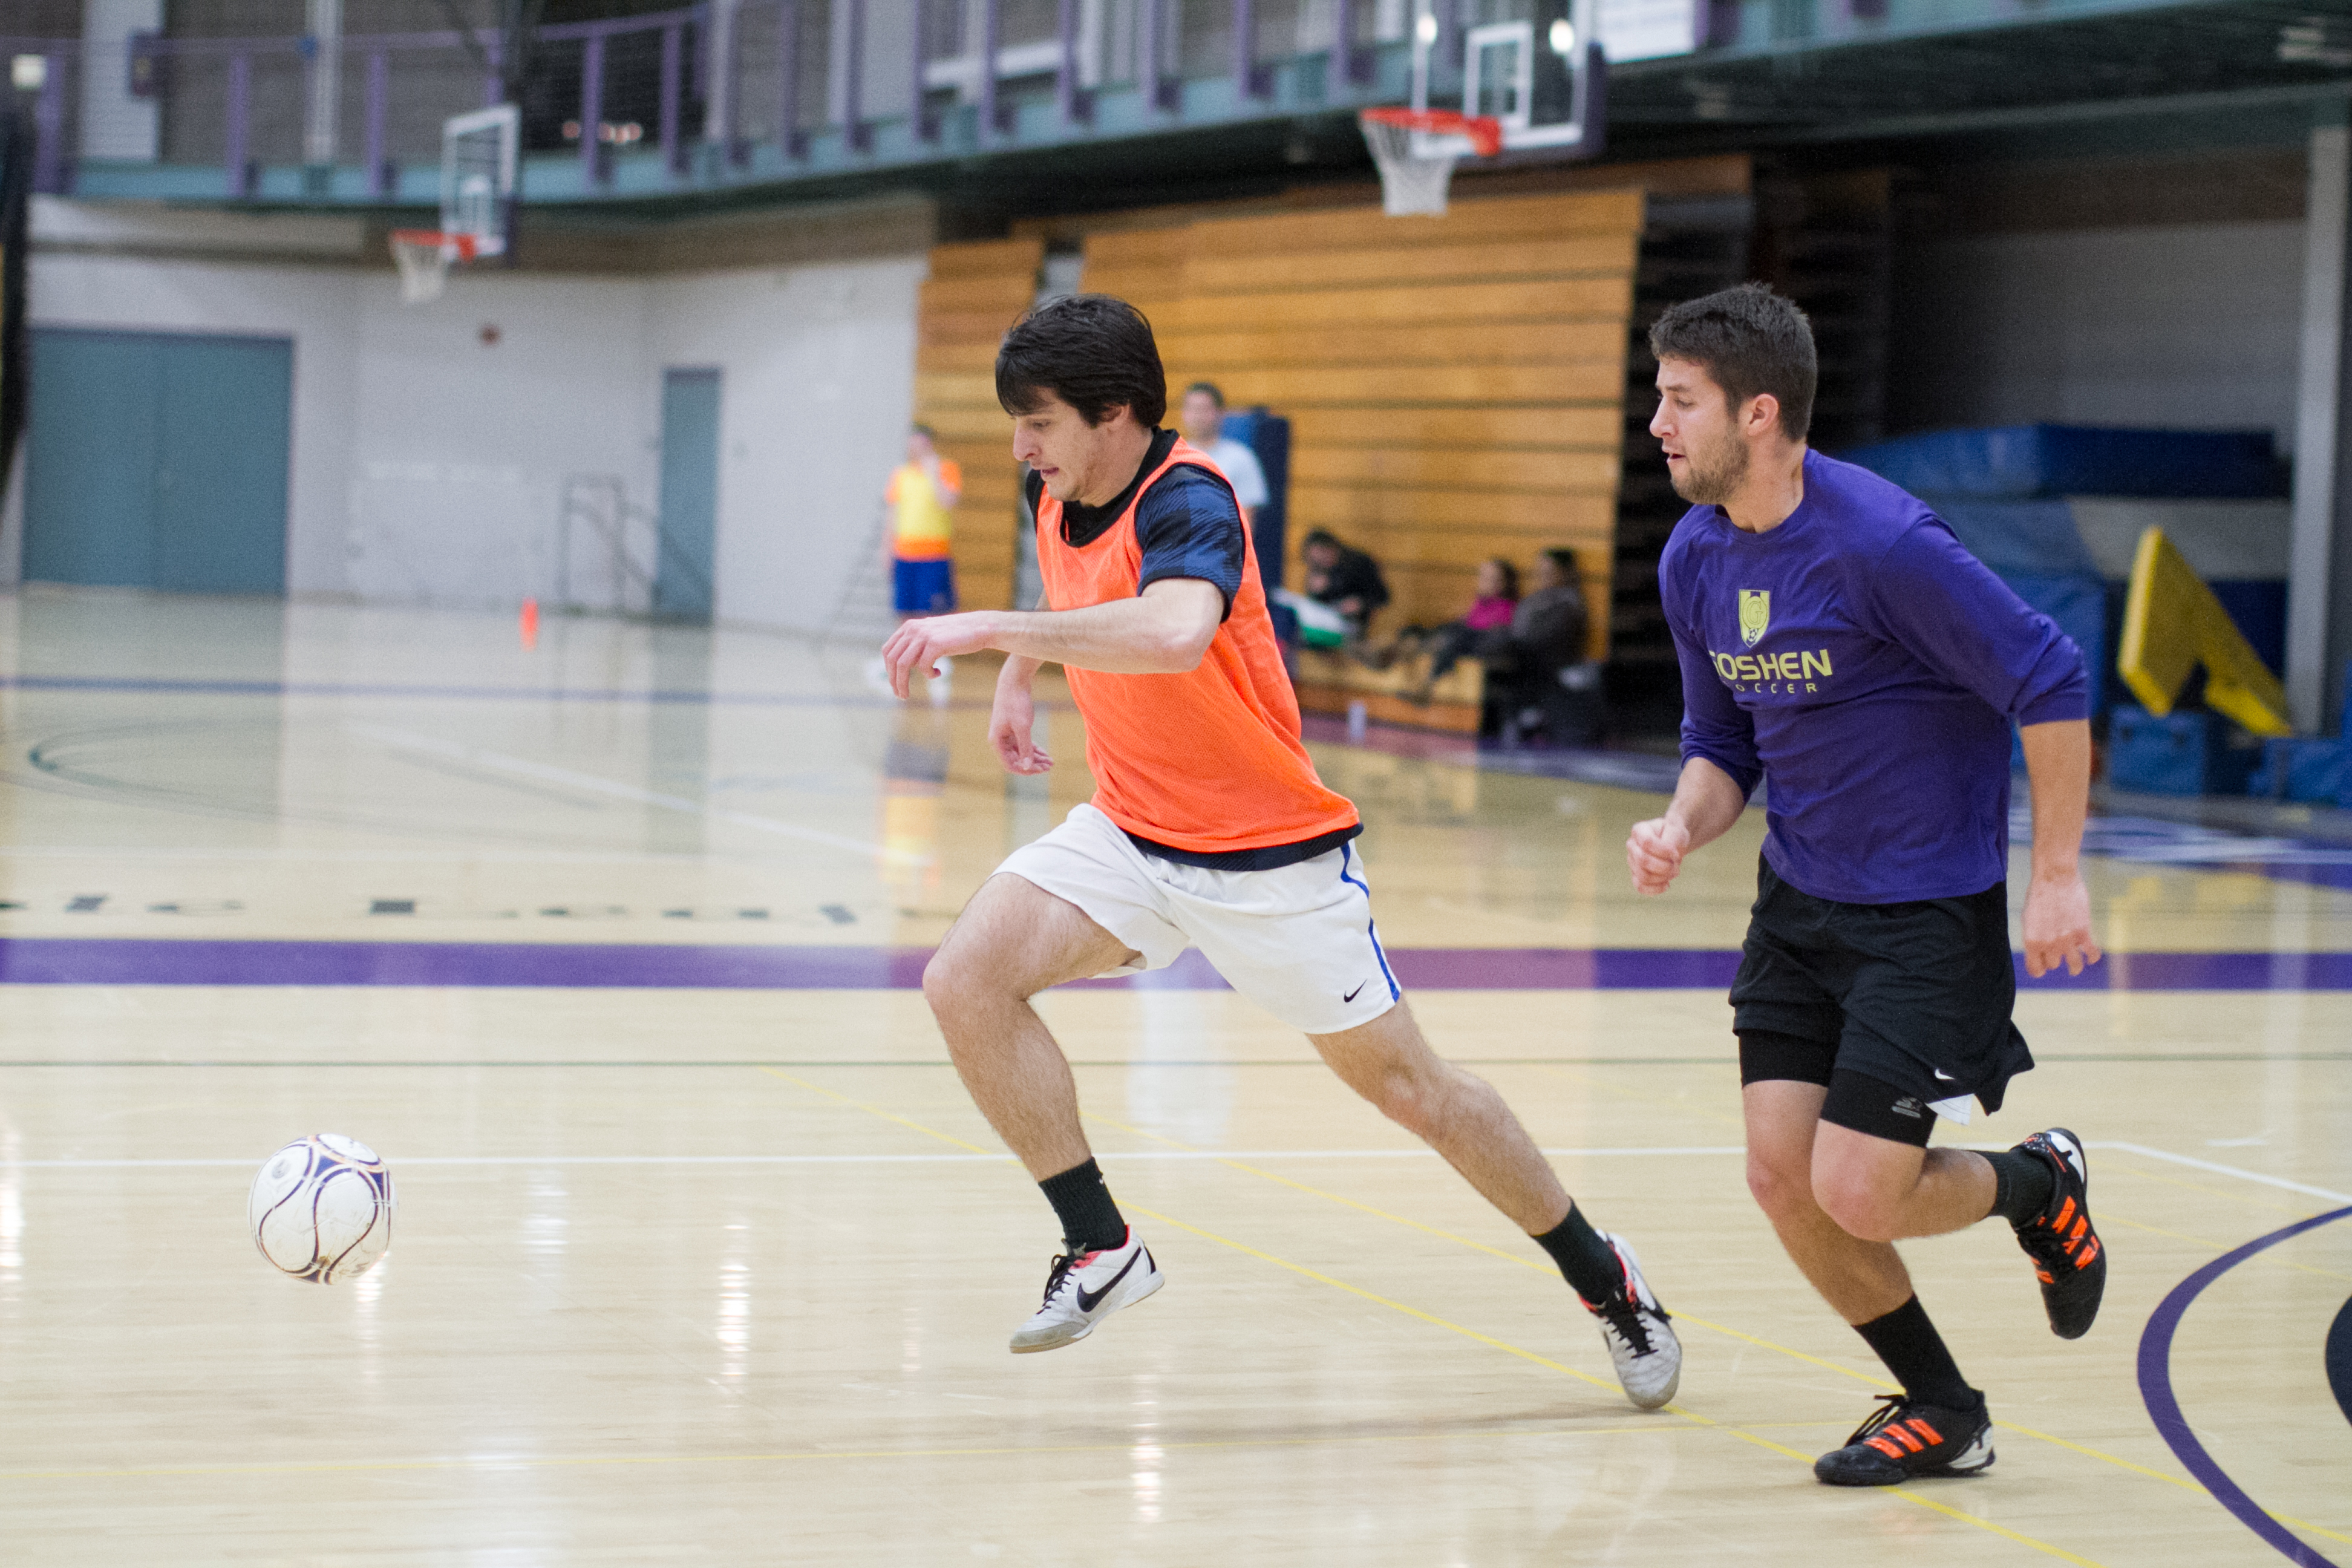 Two students play a game of intramural soccer in the RFC